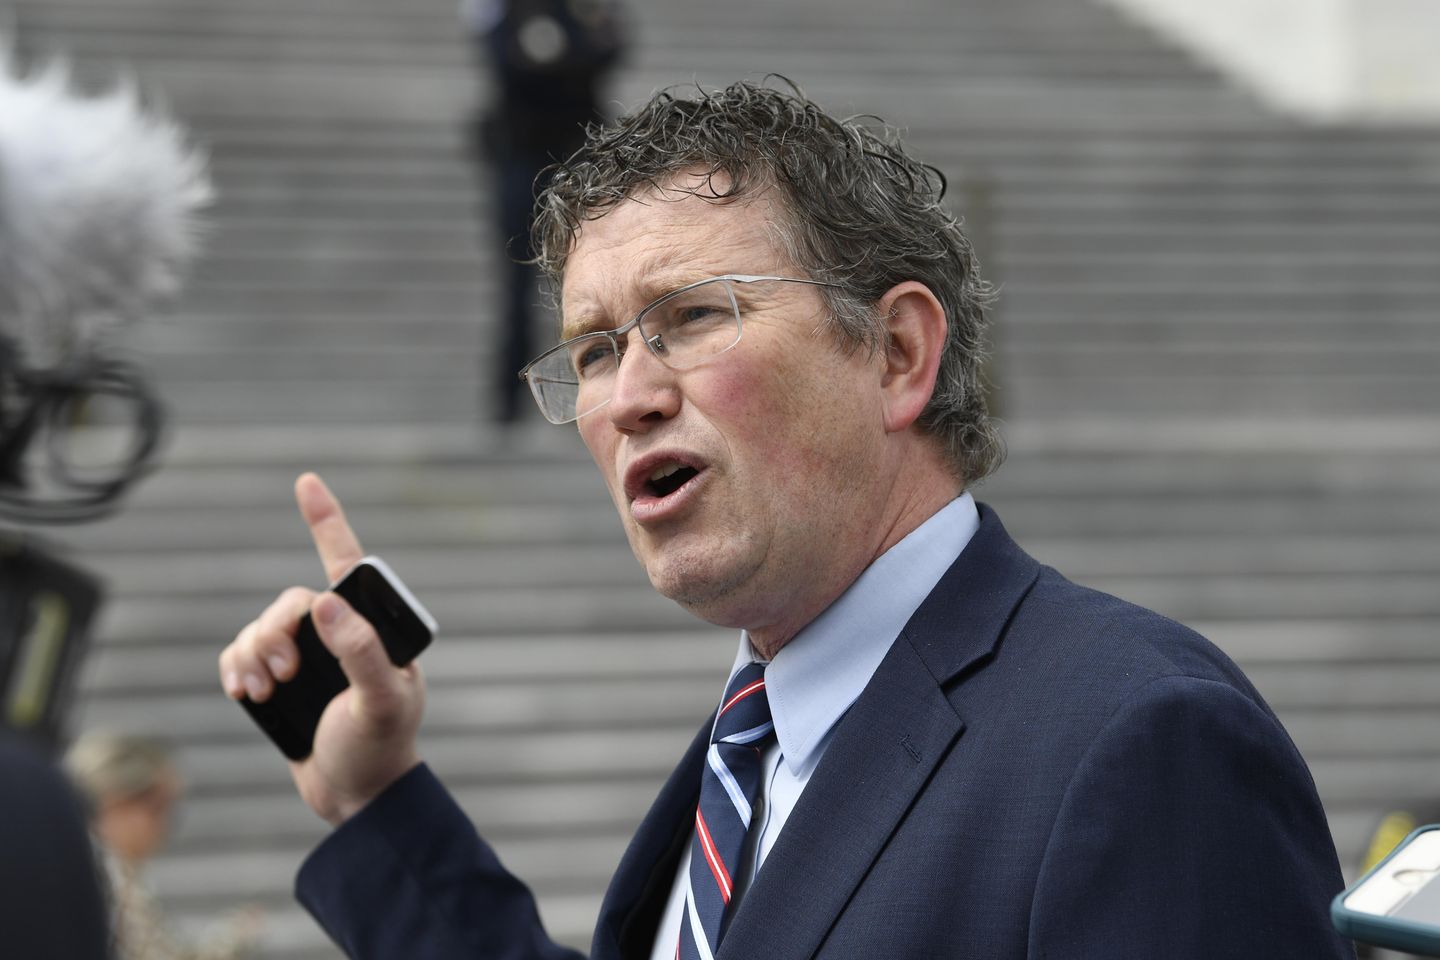 GOP lawmaker, office ‘will not comply’ with D.C. vaccine mandate